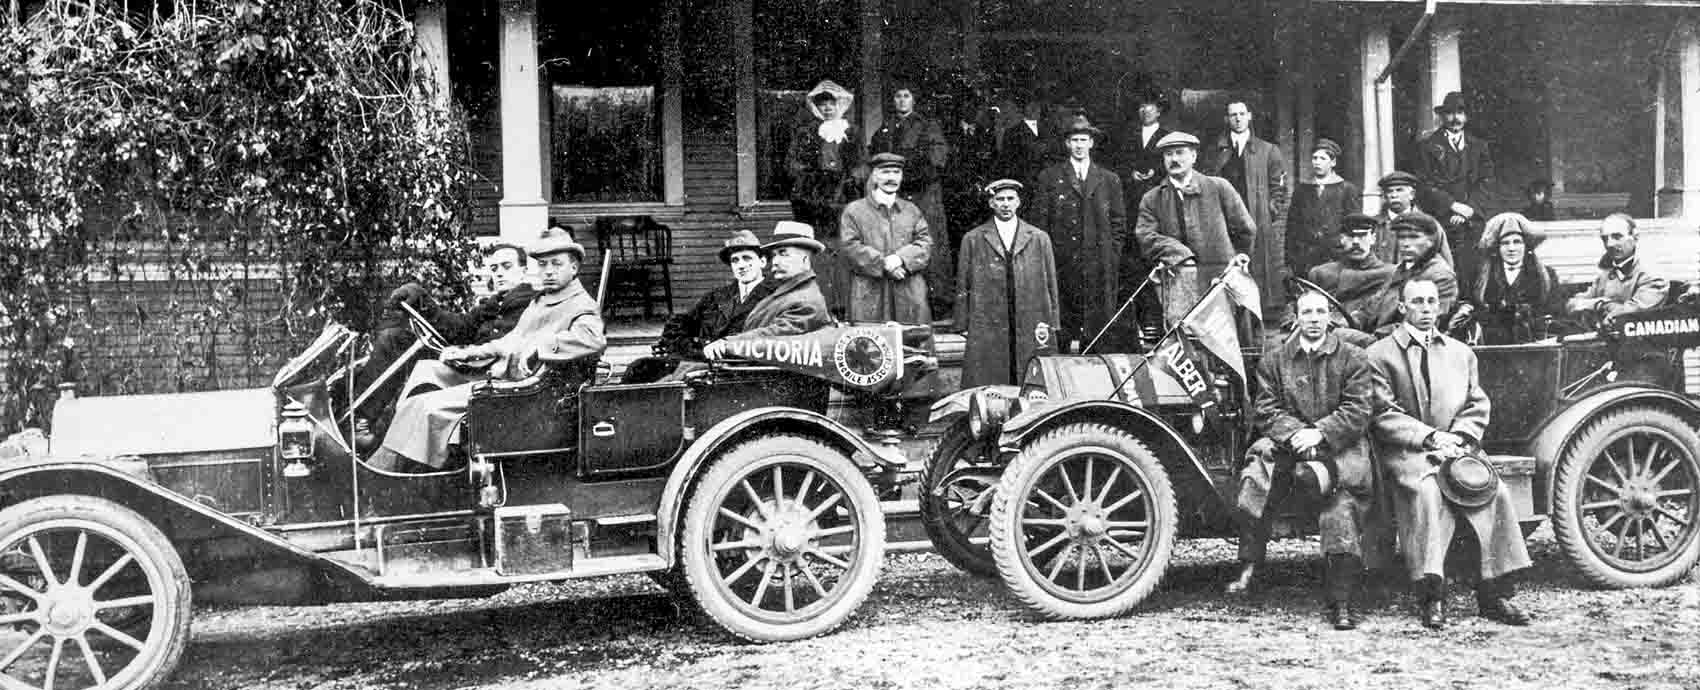 11 car enthusiasts founded BCAA in Victoria back in 1906